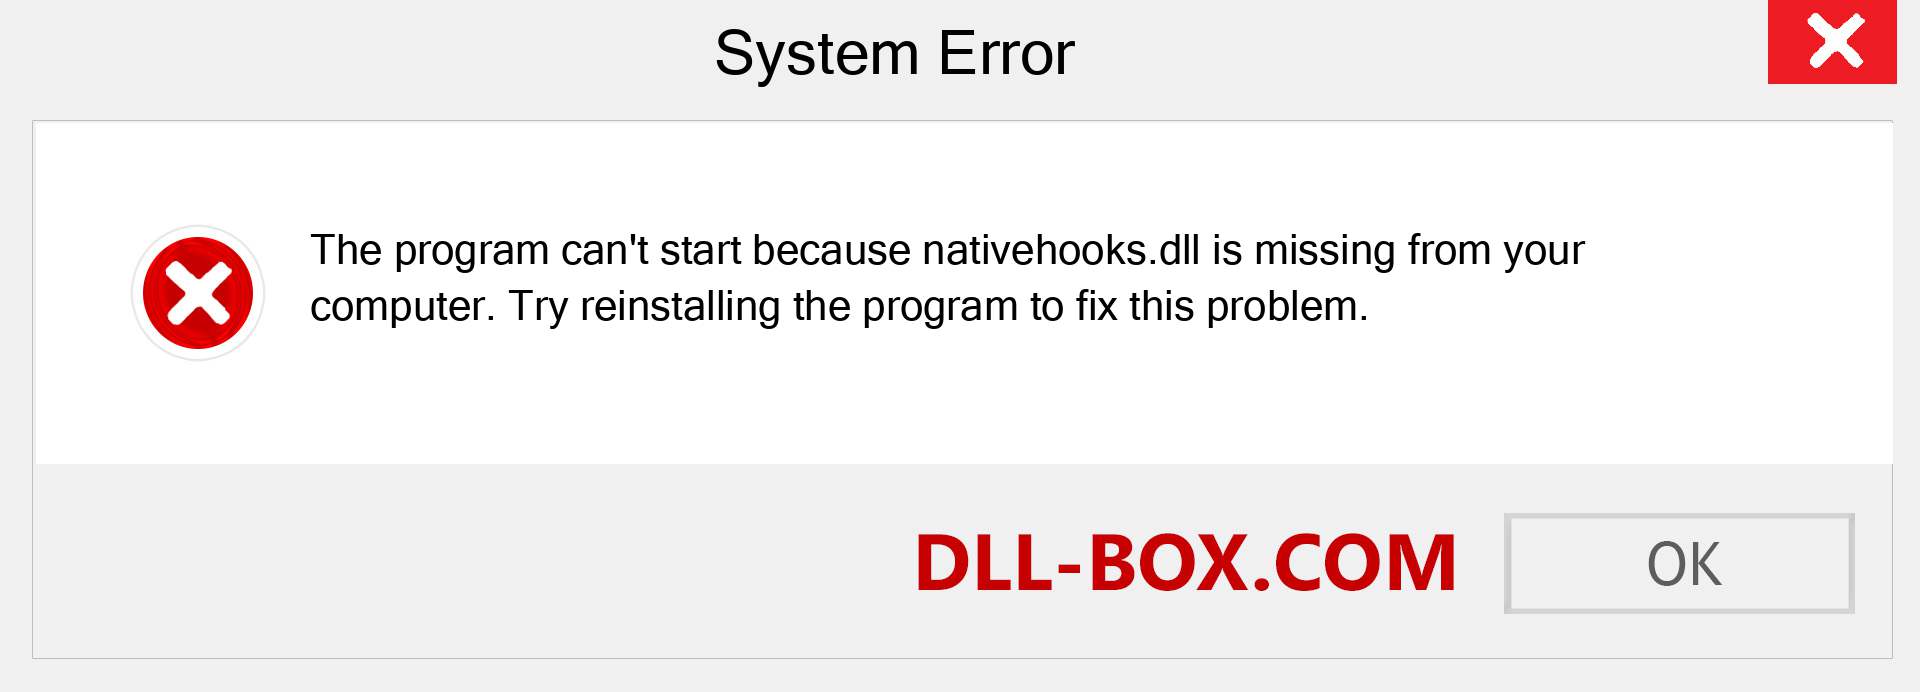  nativehooks.dll file is missing?. Download for Windows 7, 8, 10 - Fix  nativehooks dll Missing Error on Windows, photos, images